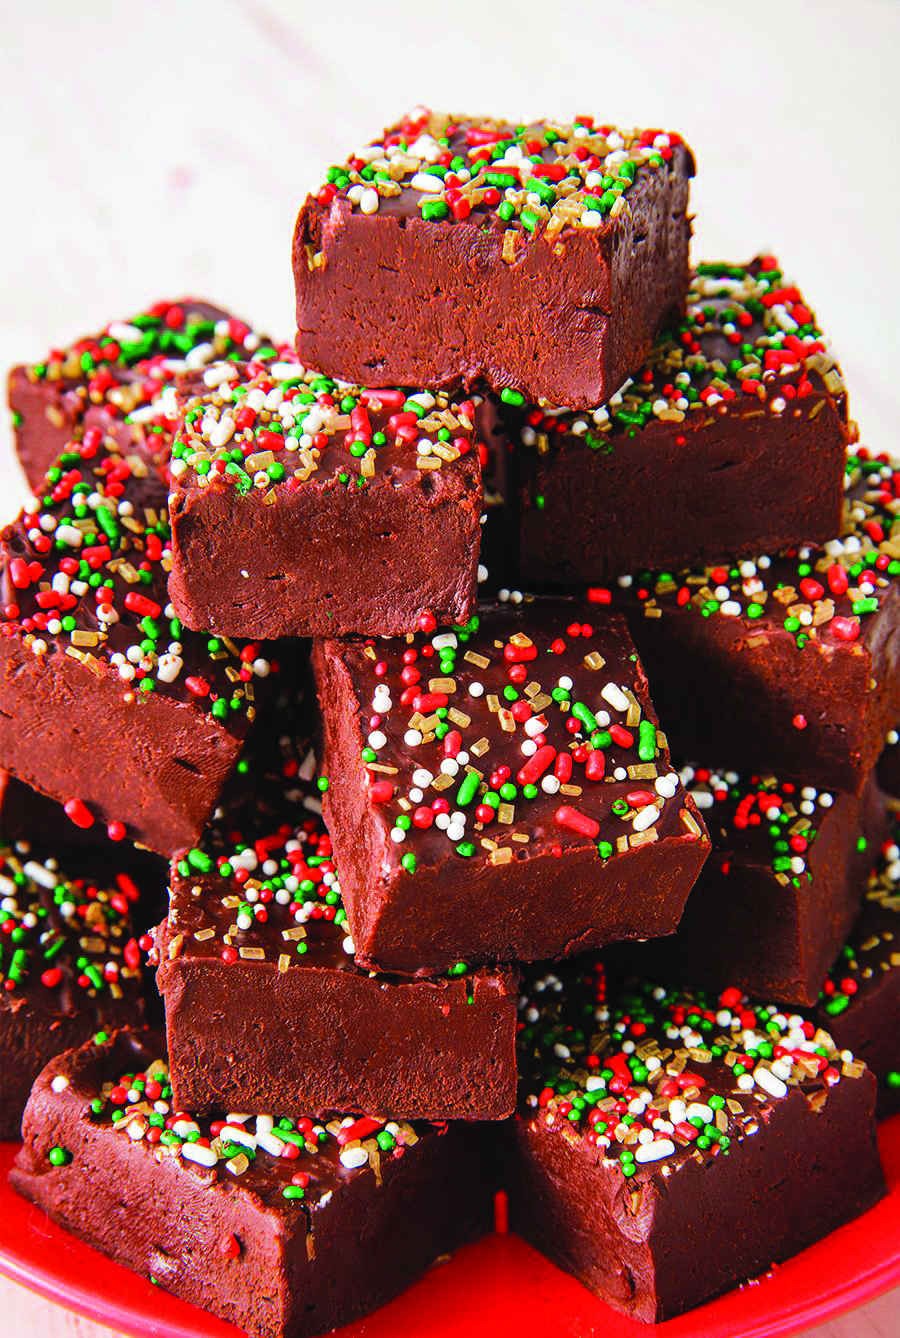 Homemade food gifts are always well received, such as this easy fudge made more festive with colorful sprinkles.